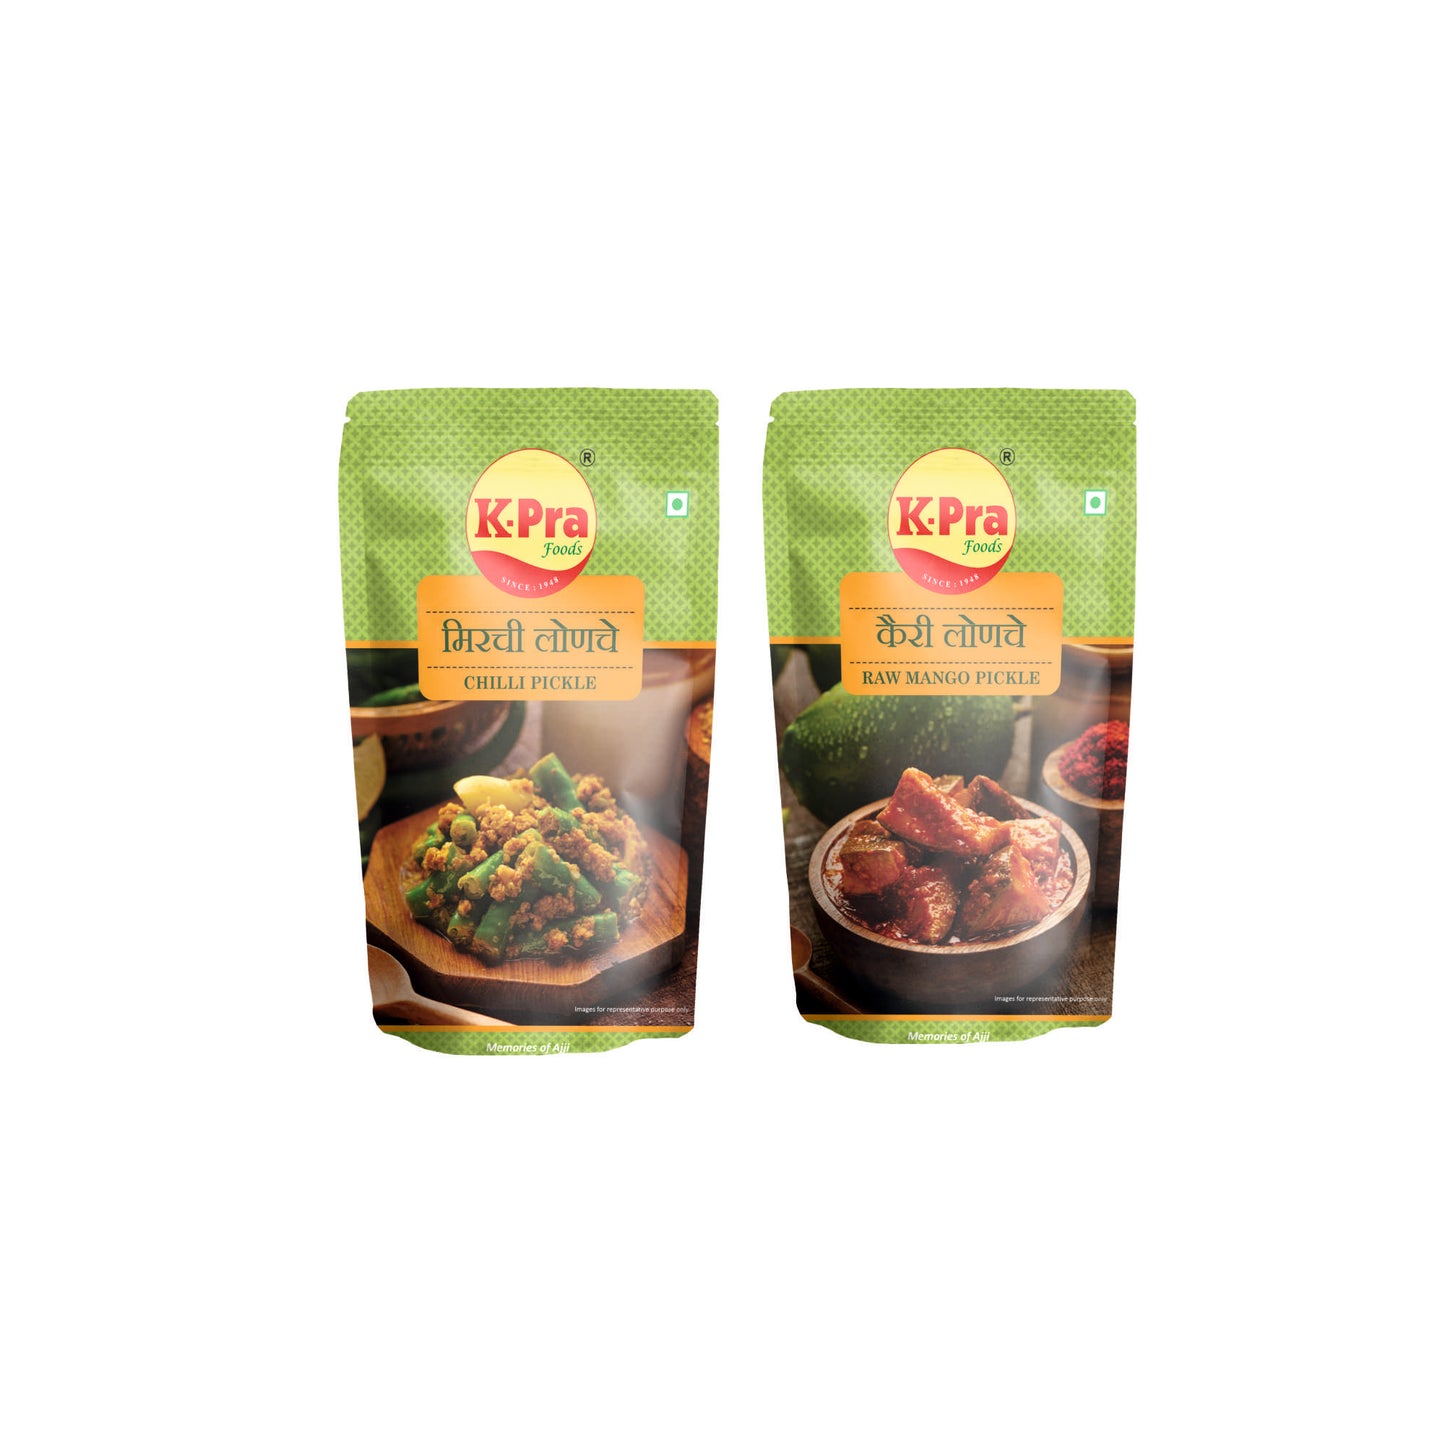 MANGO PICKLE & CHILLI PICKLE POUCH EACH PACK OF 2